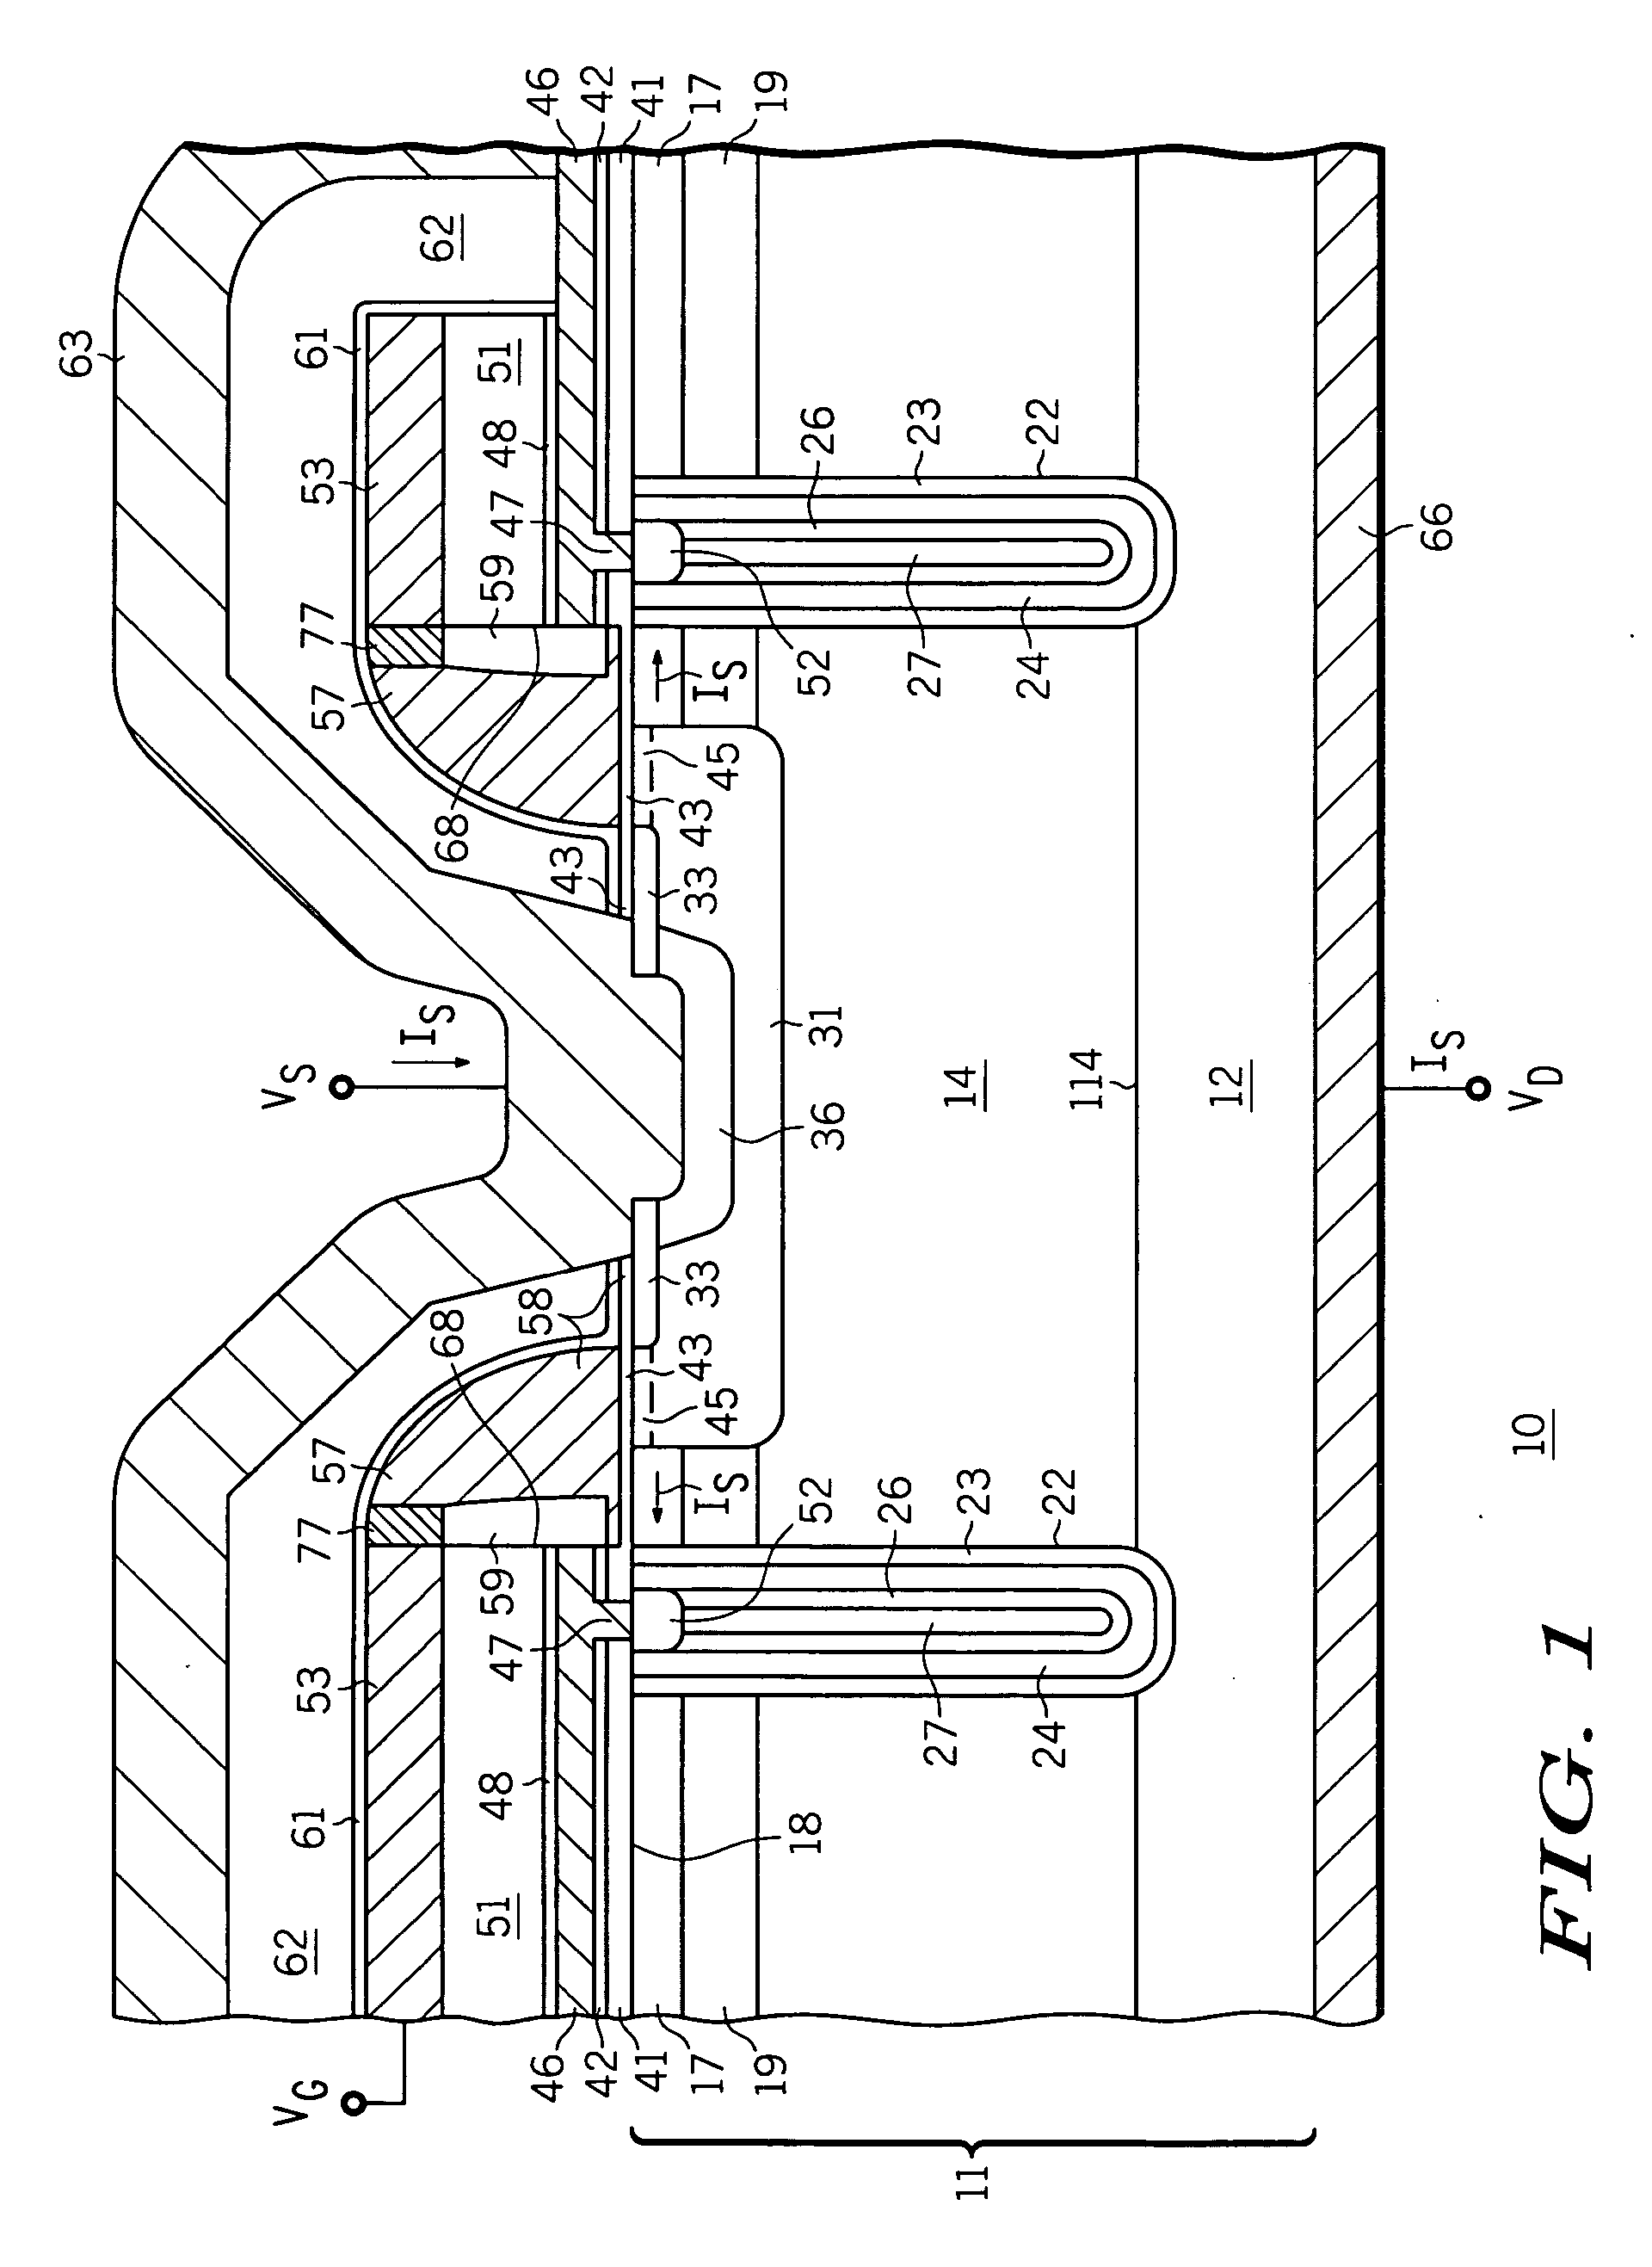 Semiconductor device having deep trench charge compensation regions and method